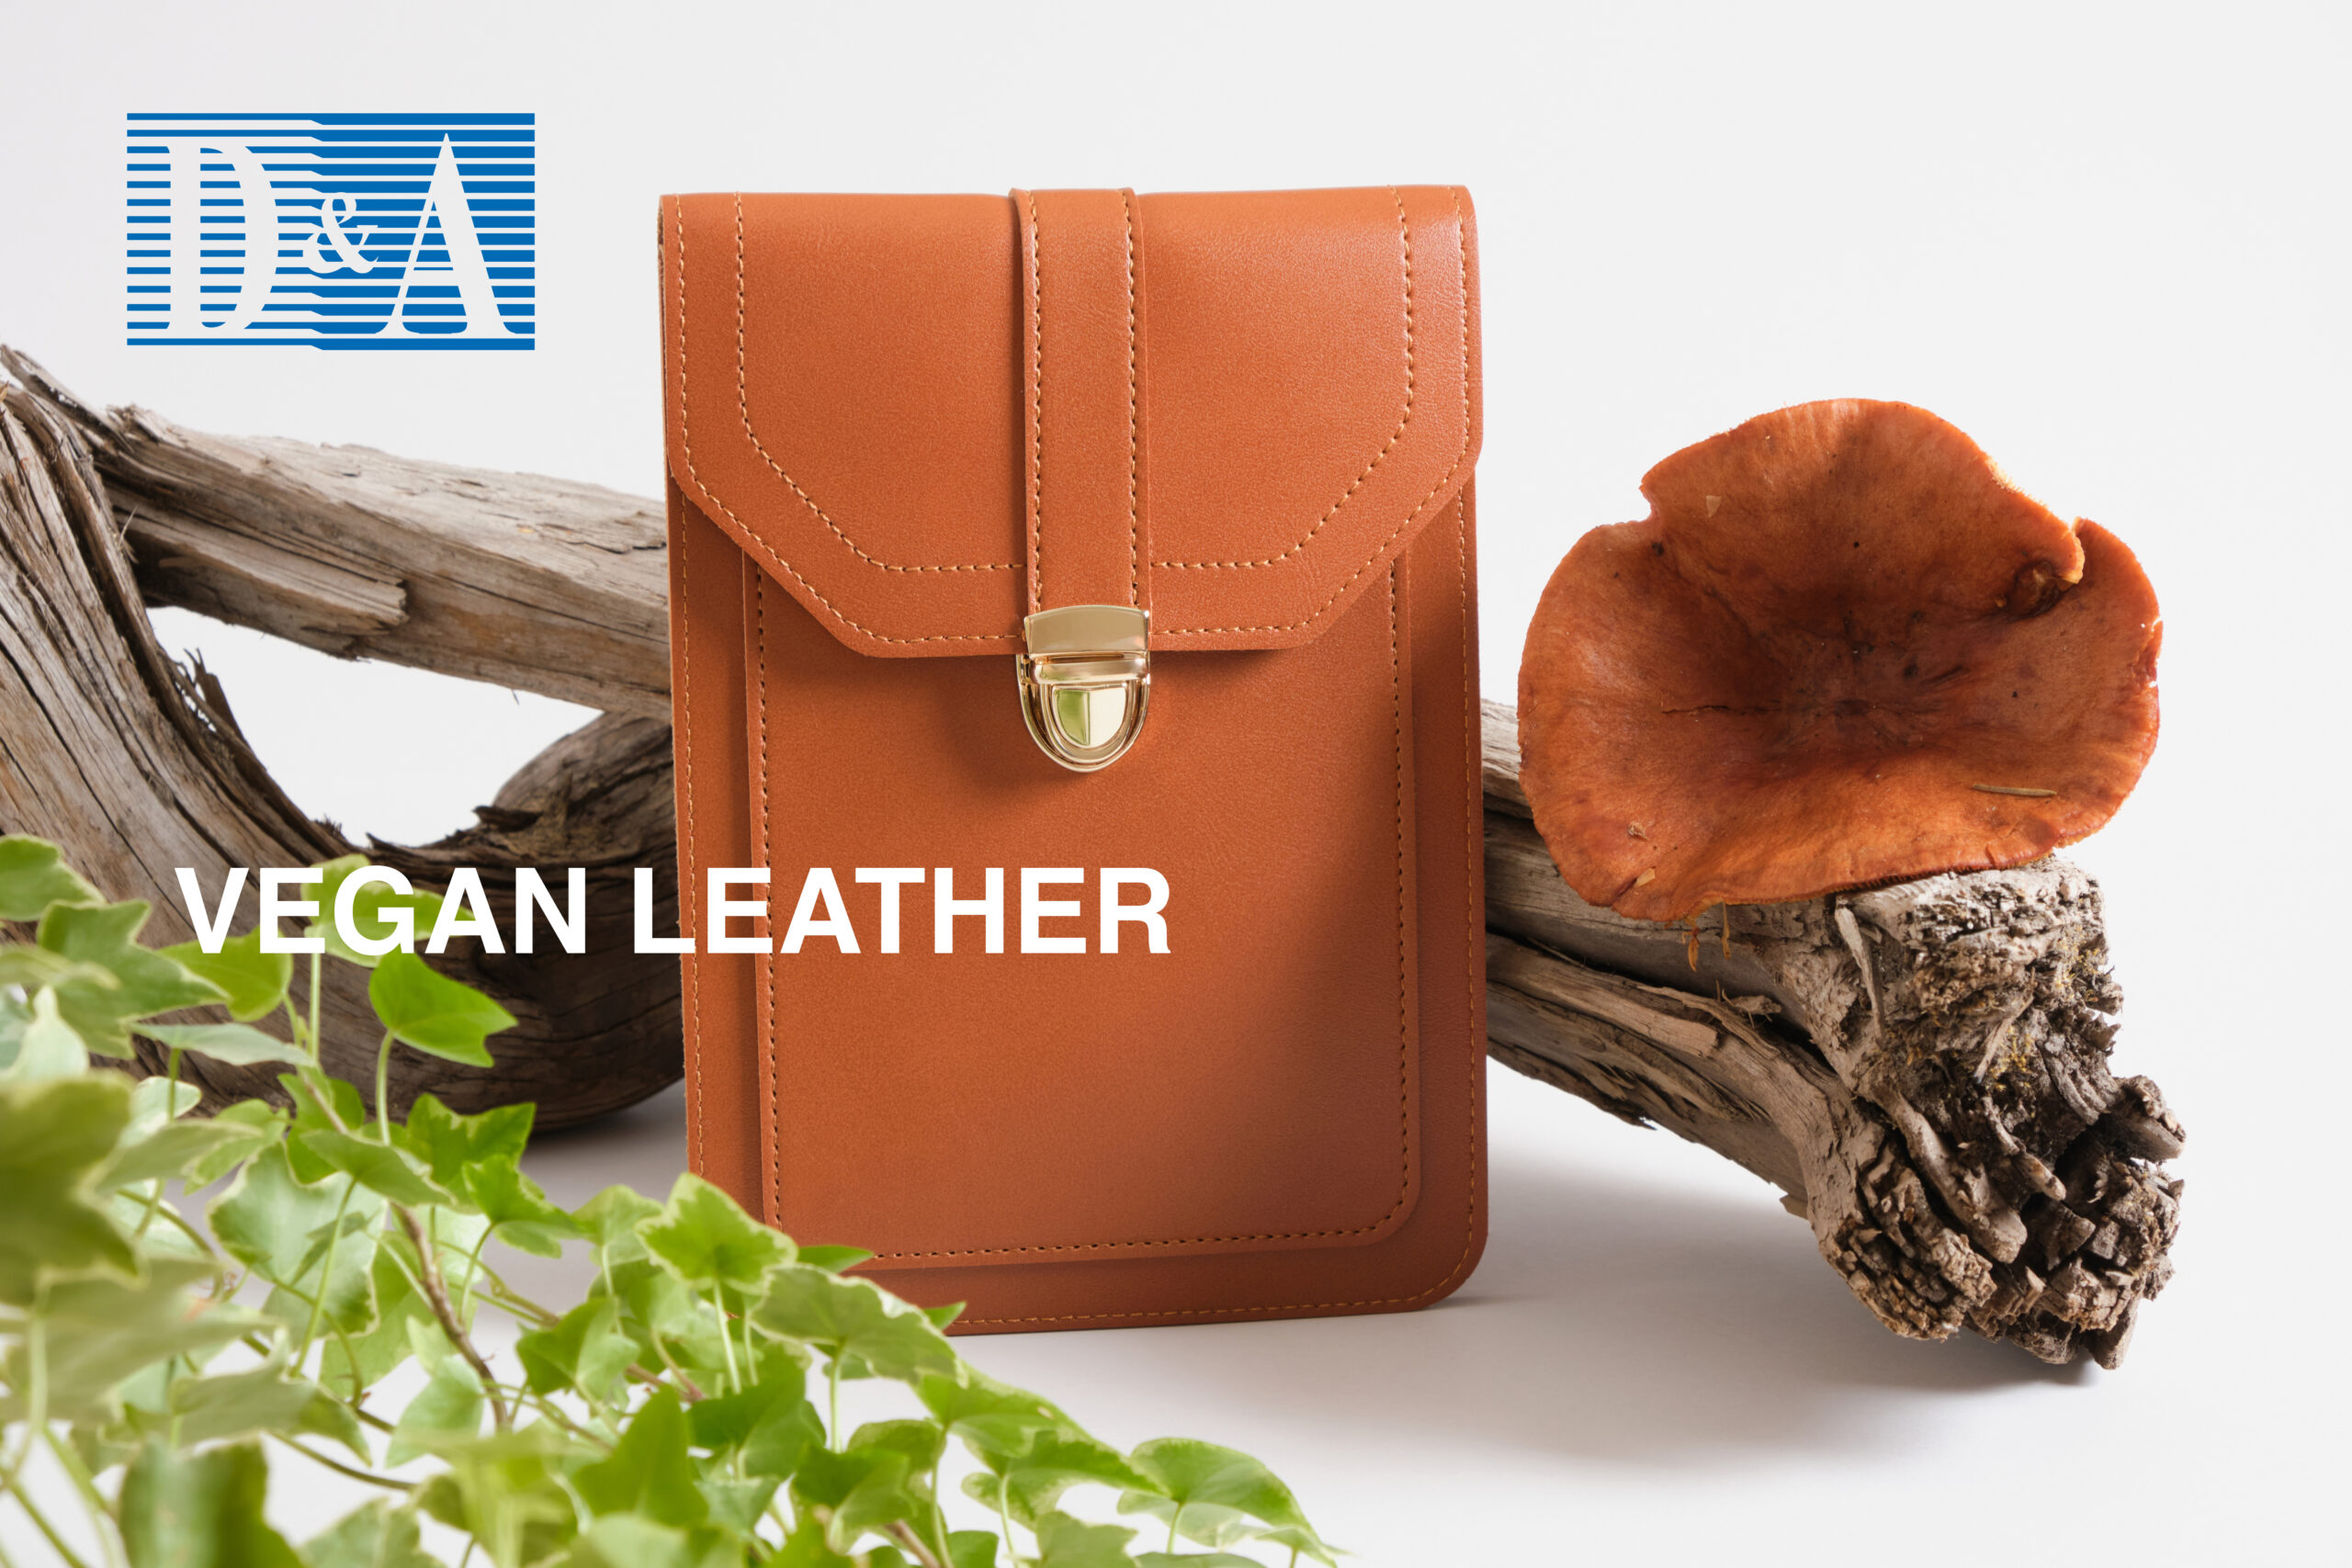 【D&A Knowledge Hub】Is Vegan Leather a Sustainable Option?